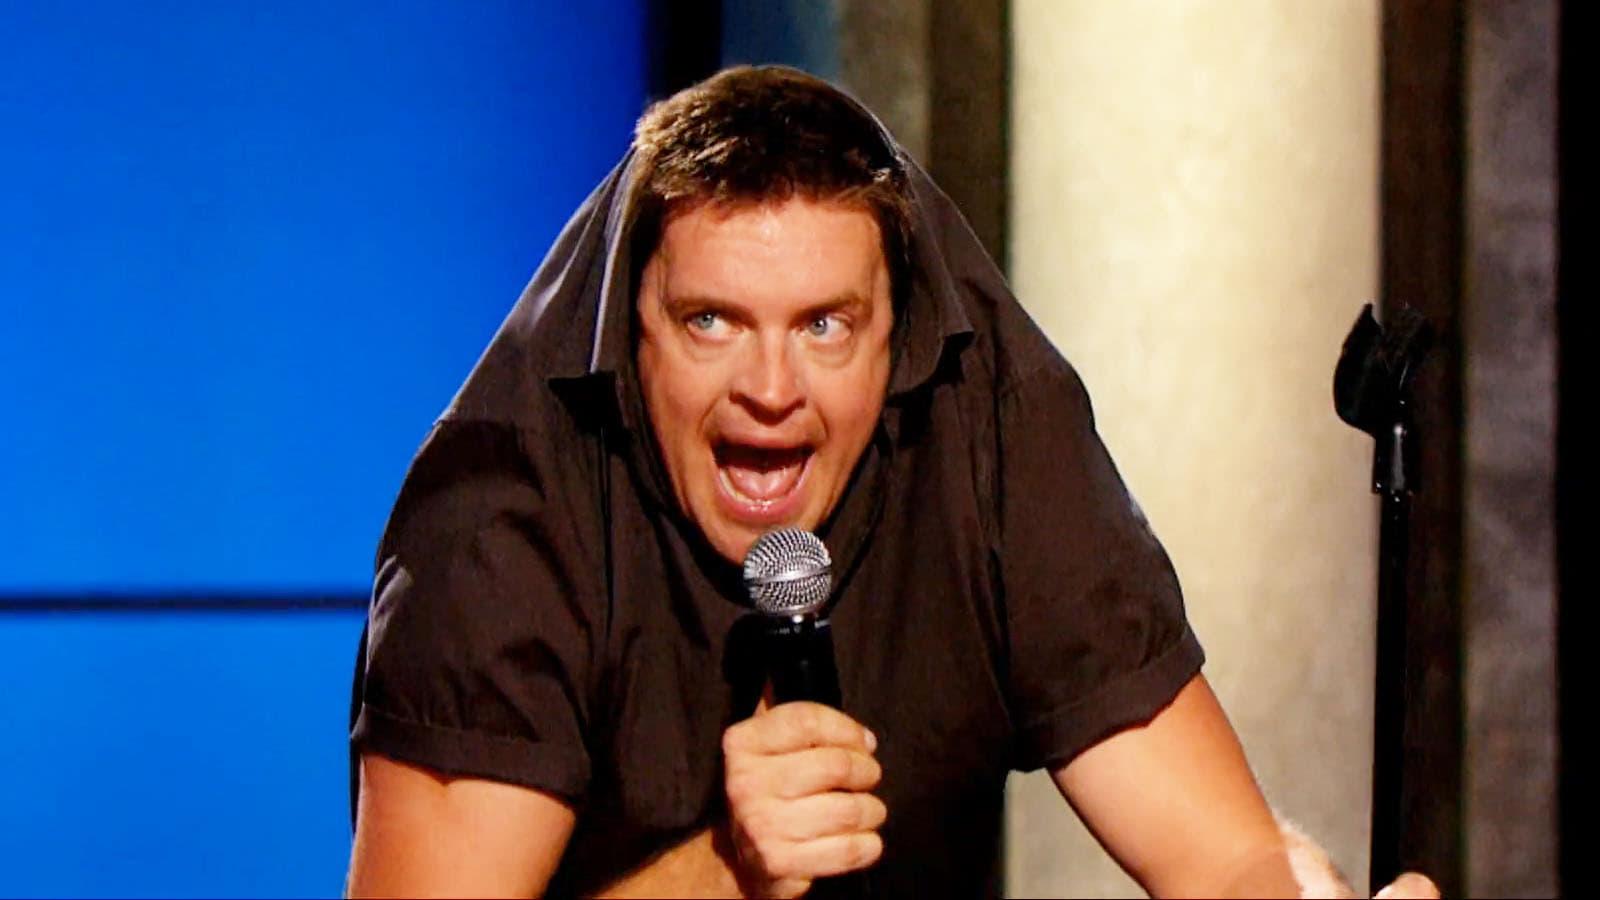 Jim Breuer: Let's Clear the Air backdrop